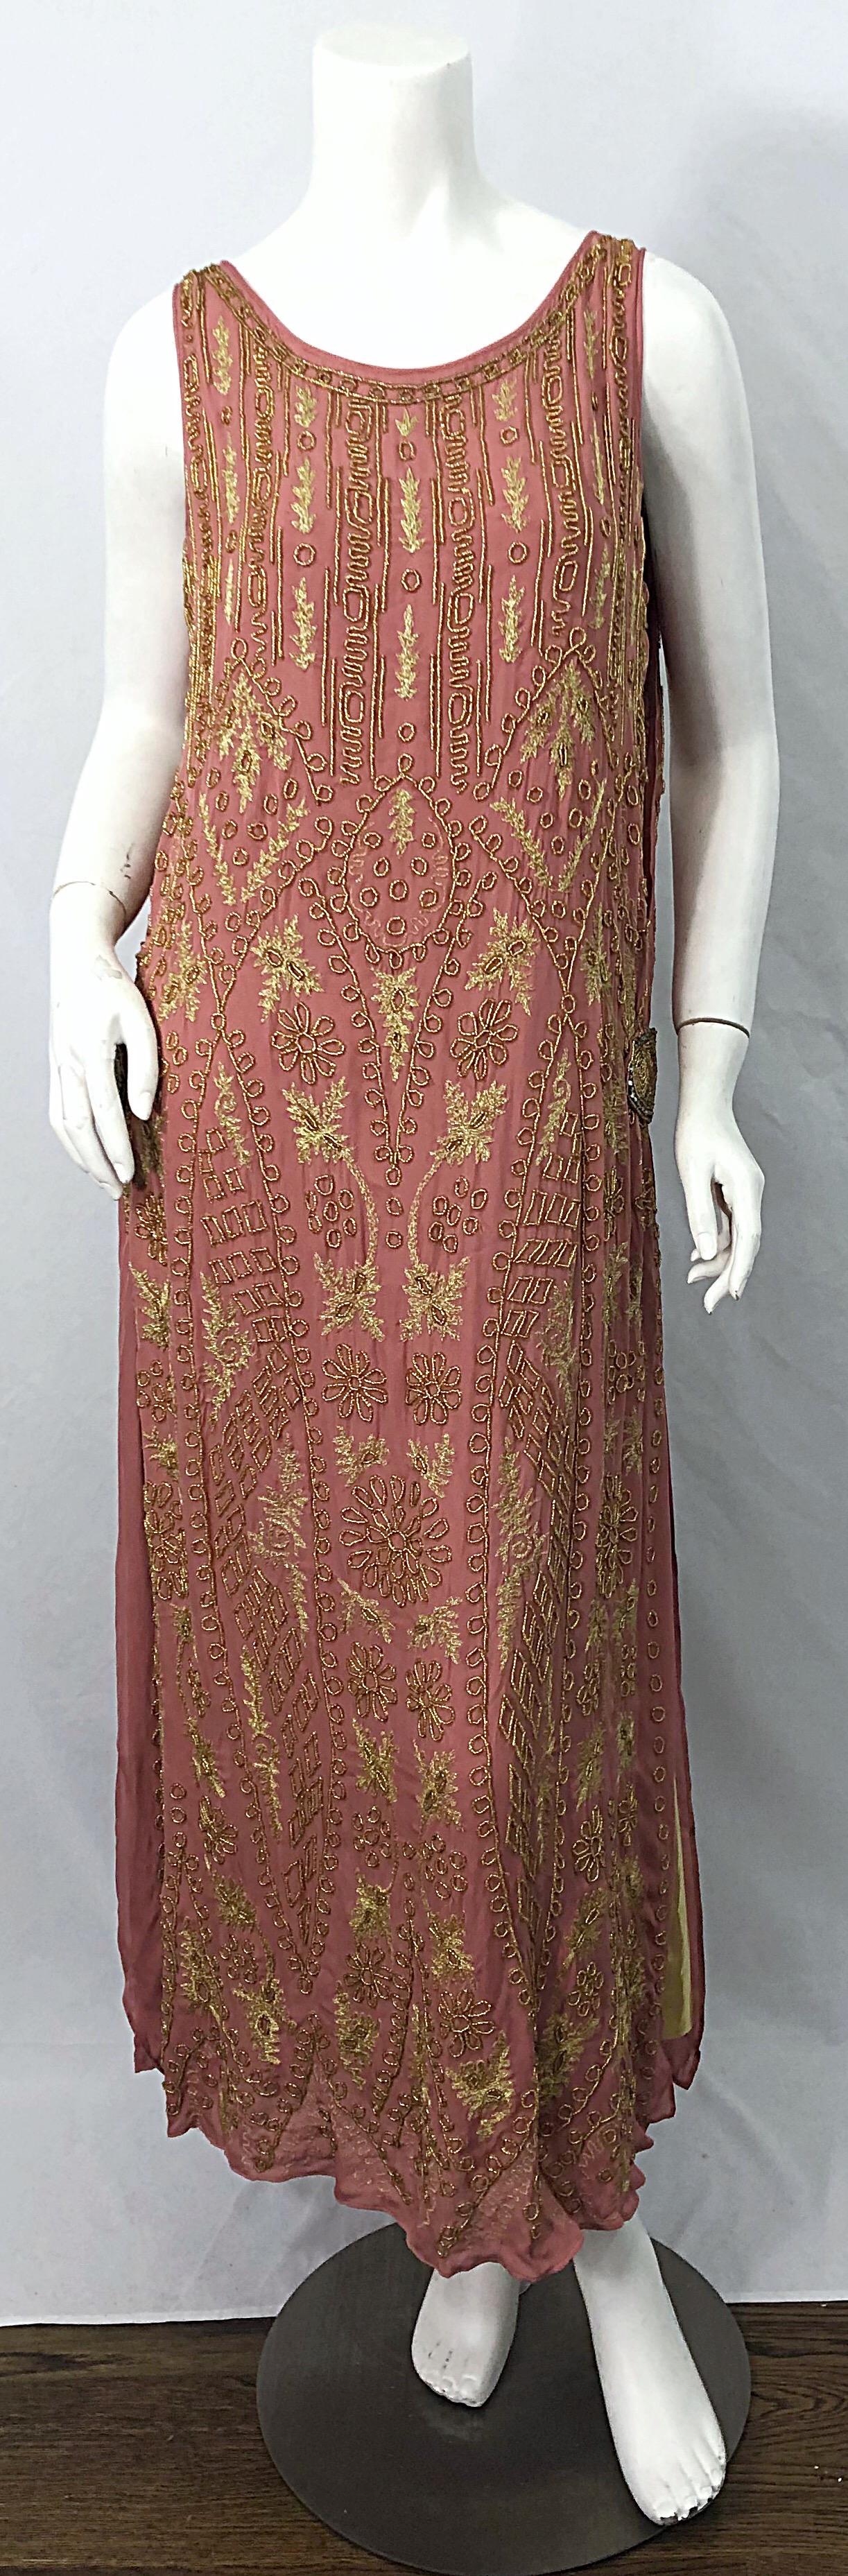 Phenomenal 1920s French couture pink and gold beaded Gatsby style flapper dress ! Features the most beautiful rose colored pink, with gold lame panels at each vent. Rhinestone buckle details at each hip. Simply slips over the head. Hand embroidery